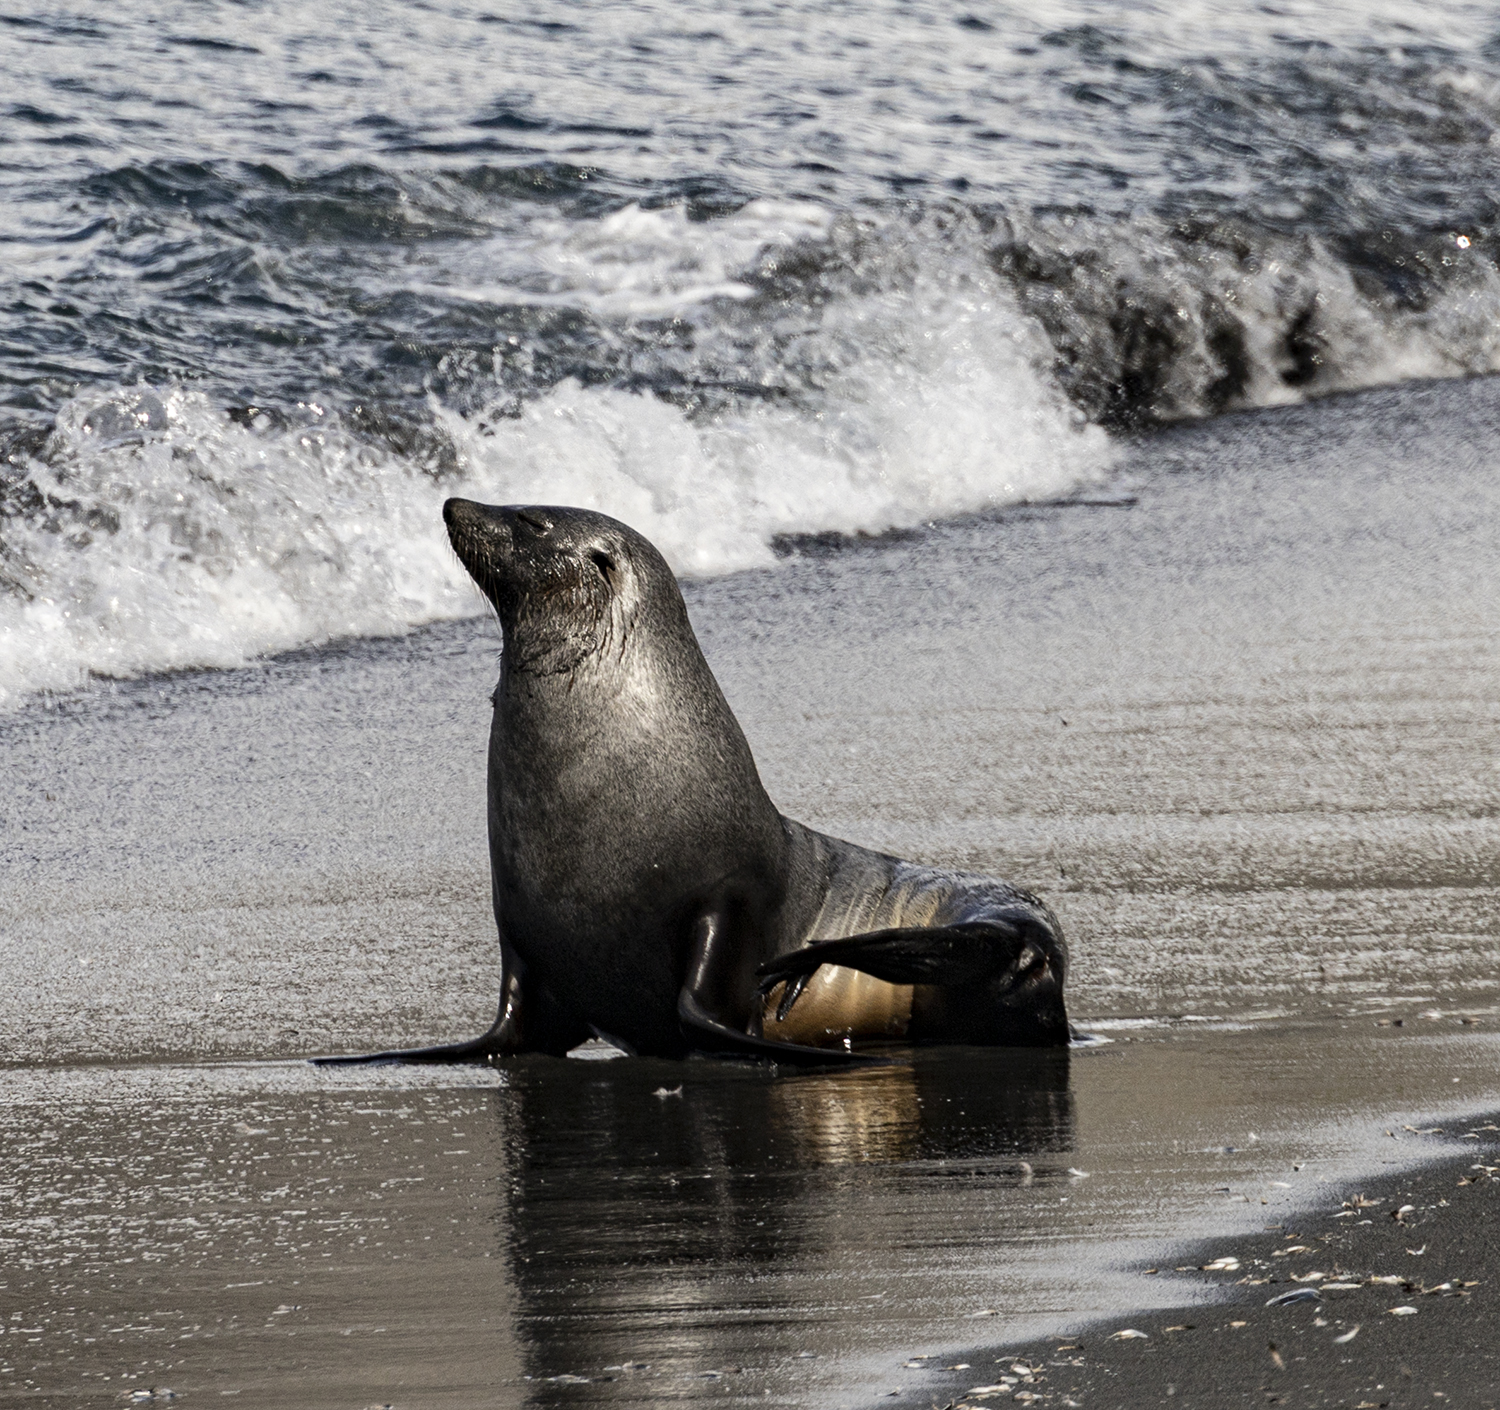 Fur seal sitting on the shore. Image: Toni Younghusband